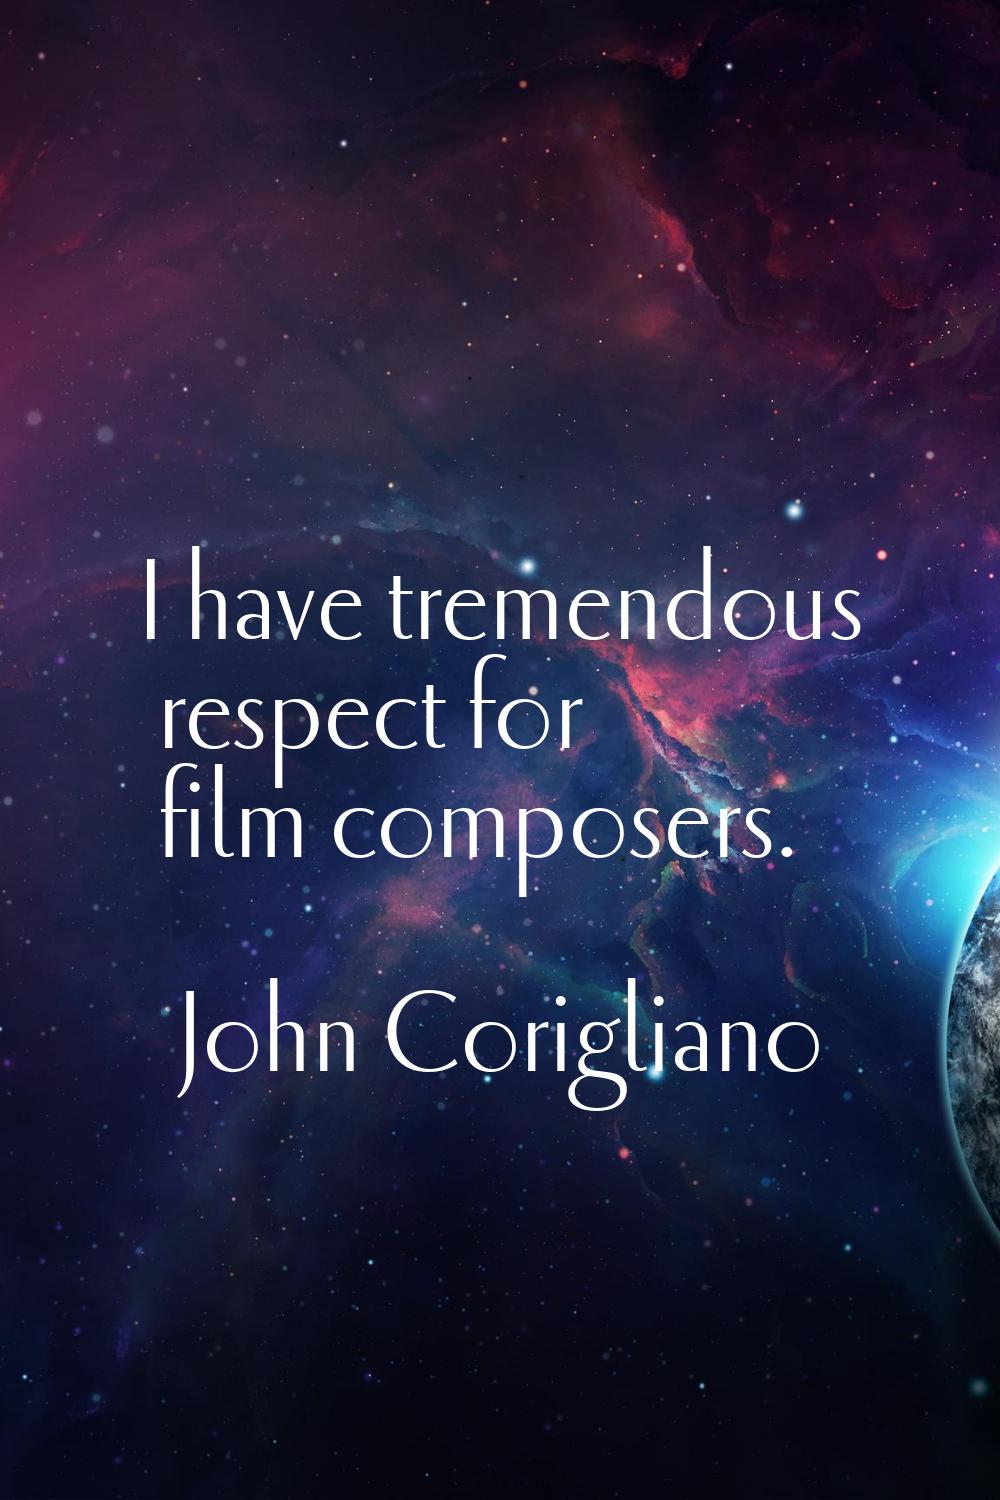 I have tremendous respect for film composers.